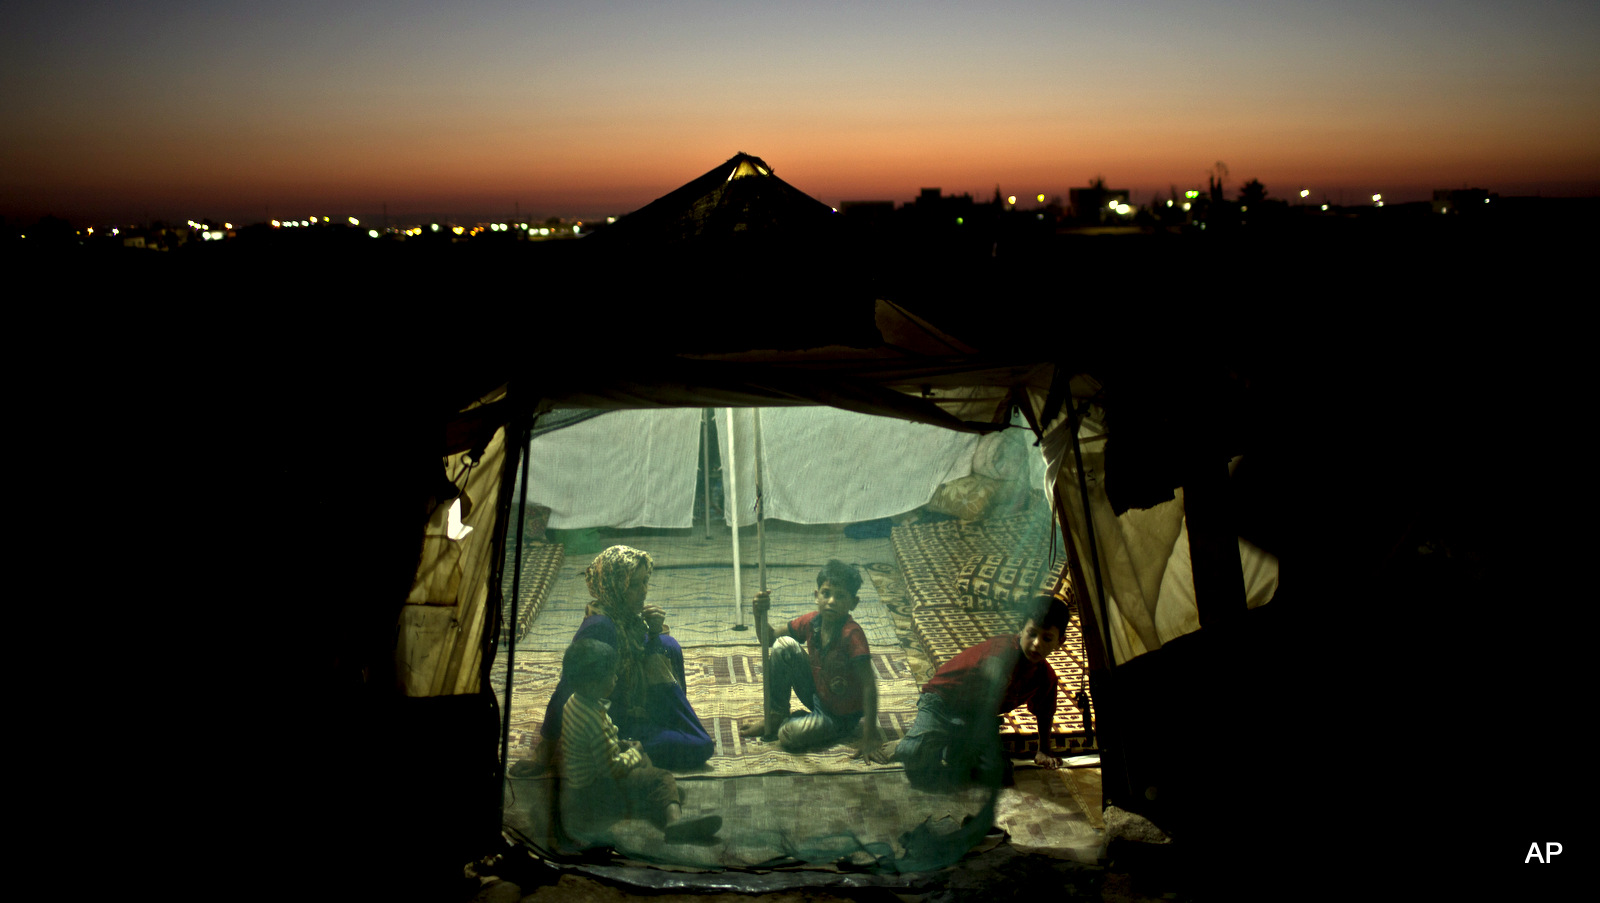 Syrian refugee Eidah Hassoun, 36, sits with her children inside their tent at an informal tented settlement near the Syrian border on the outskirts of Mafraq, Jordan.